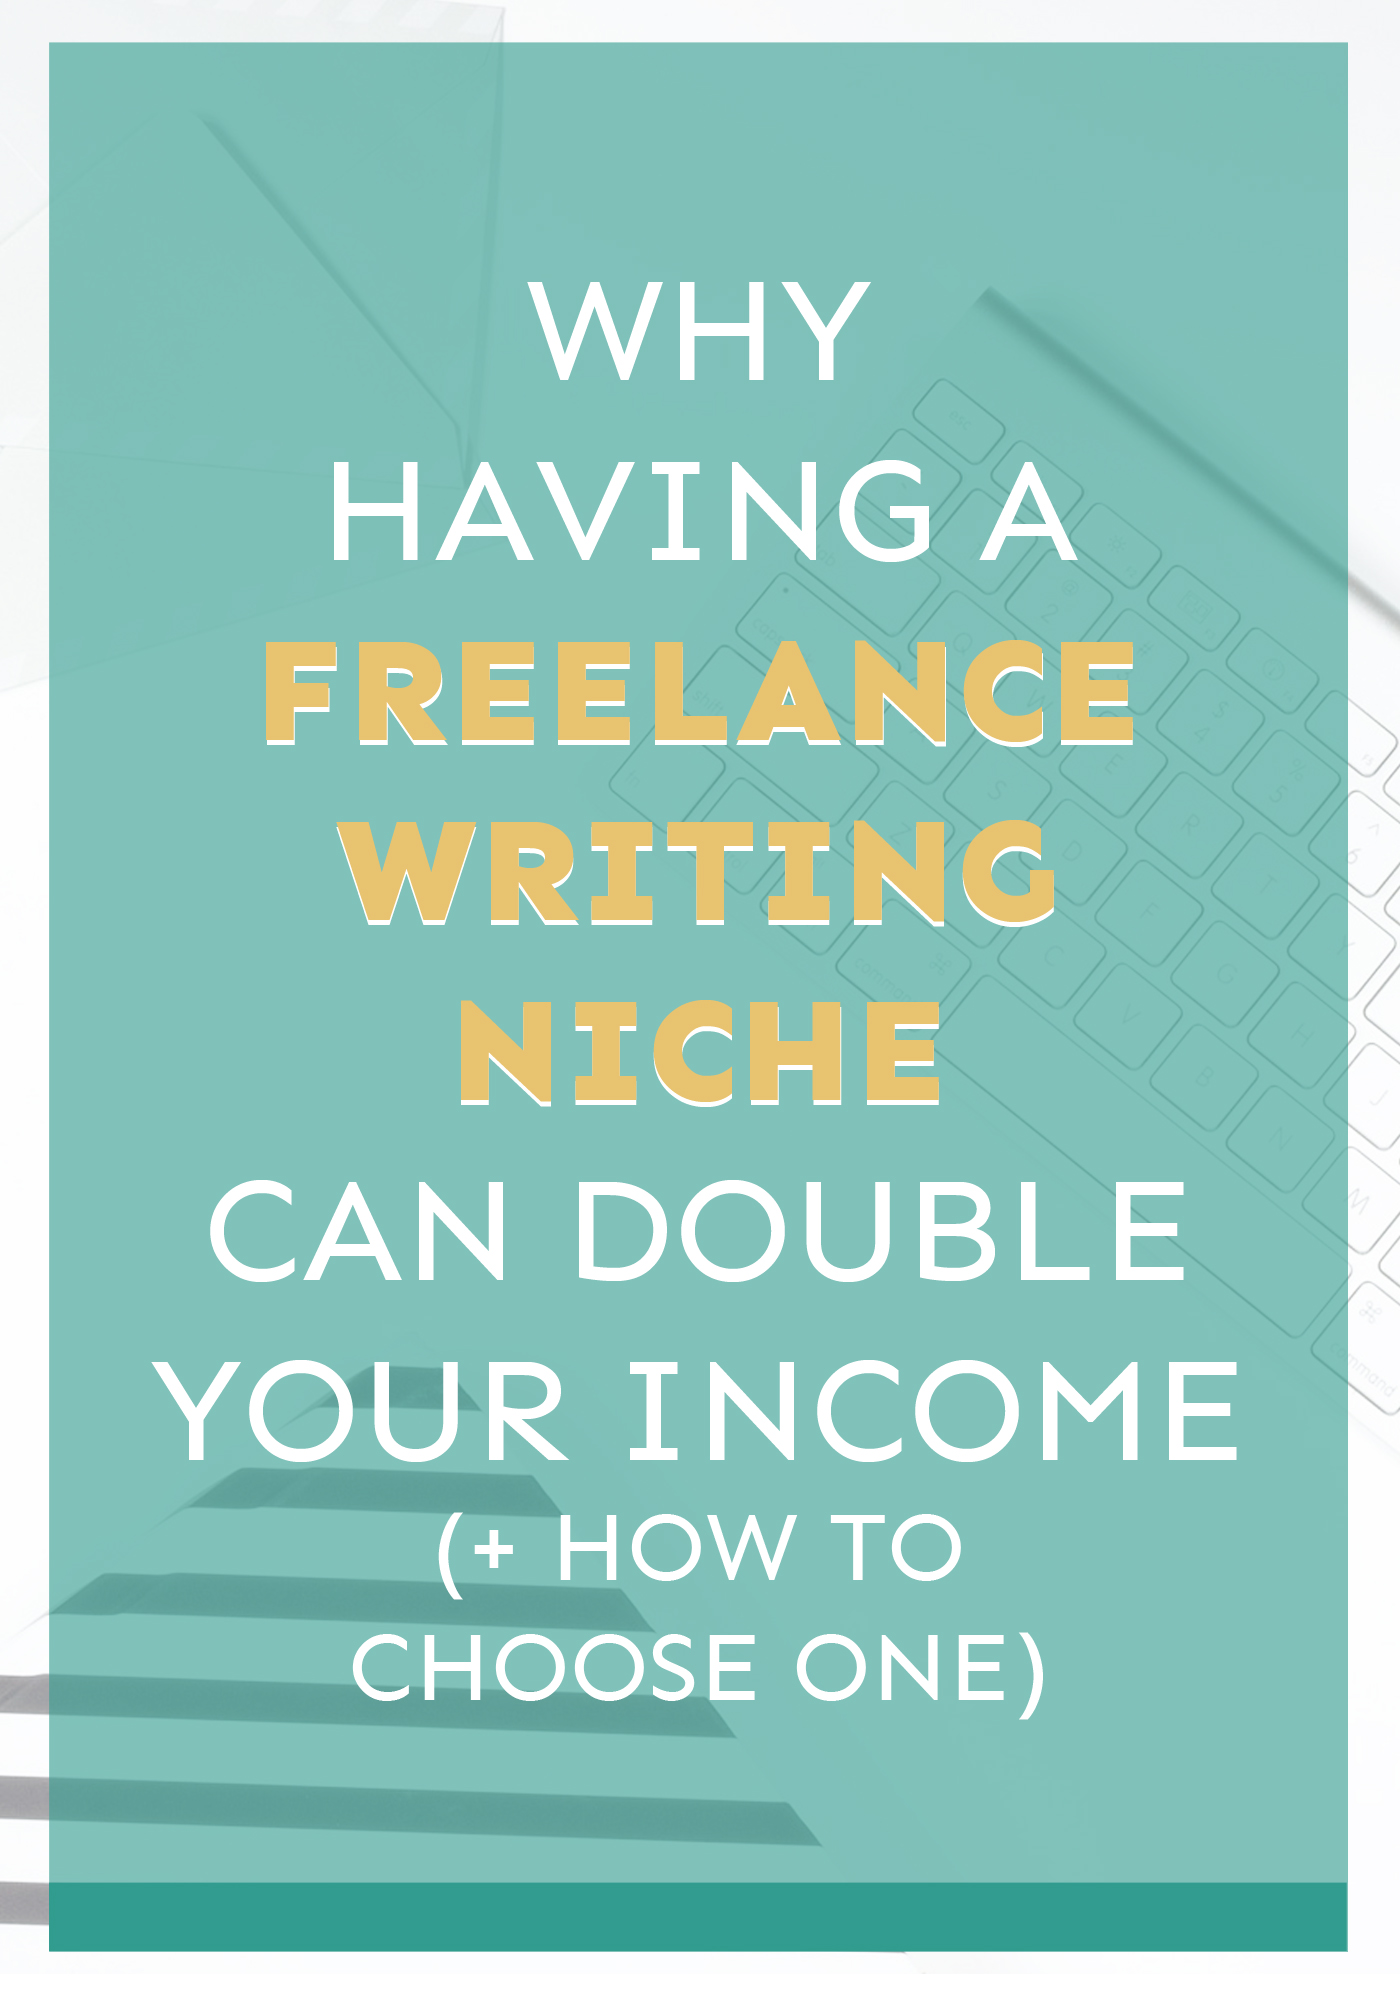 Want to know why having a freelance writing niche is so important? It's because it can double your income - no joke! Here's how it can do just that. 